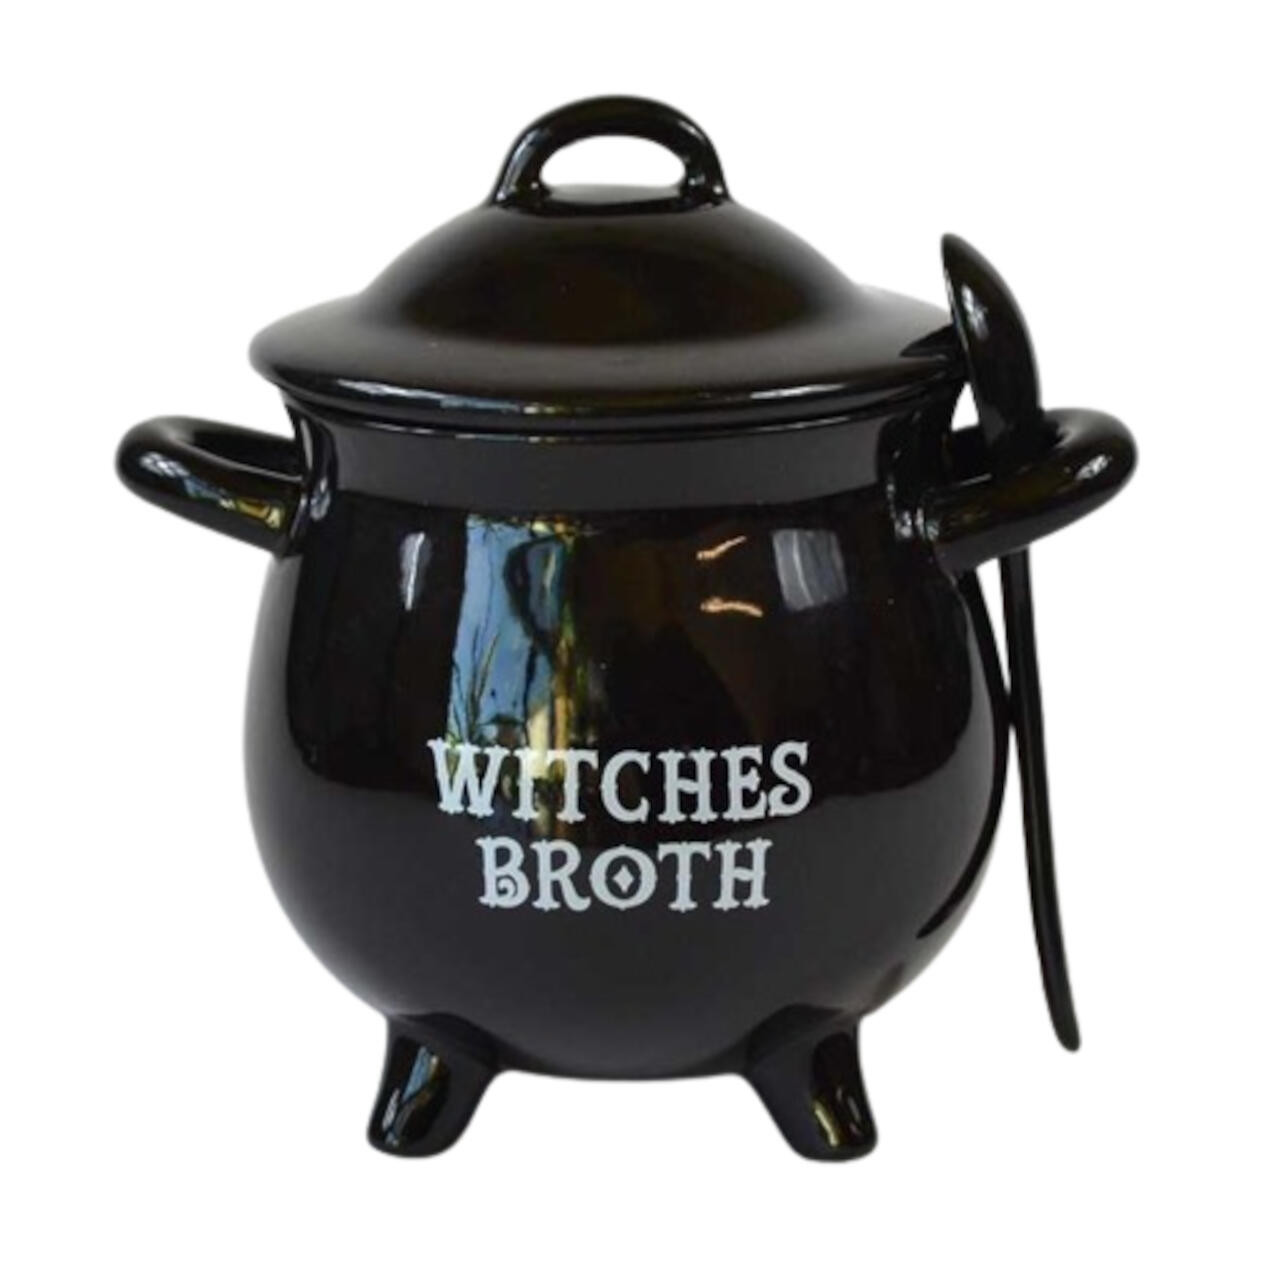 Witches Broth Bowl & Spoon 5 3/4"